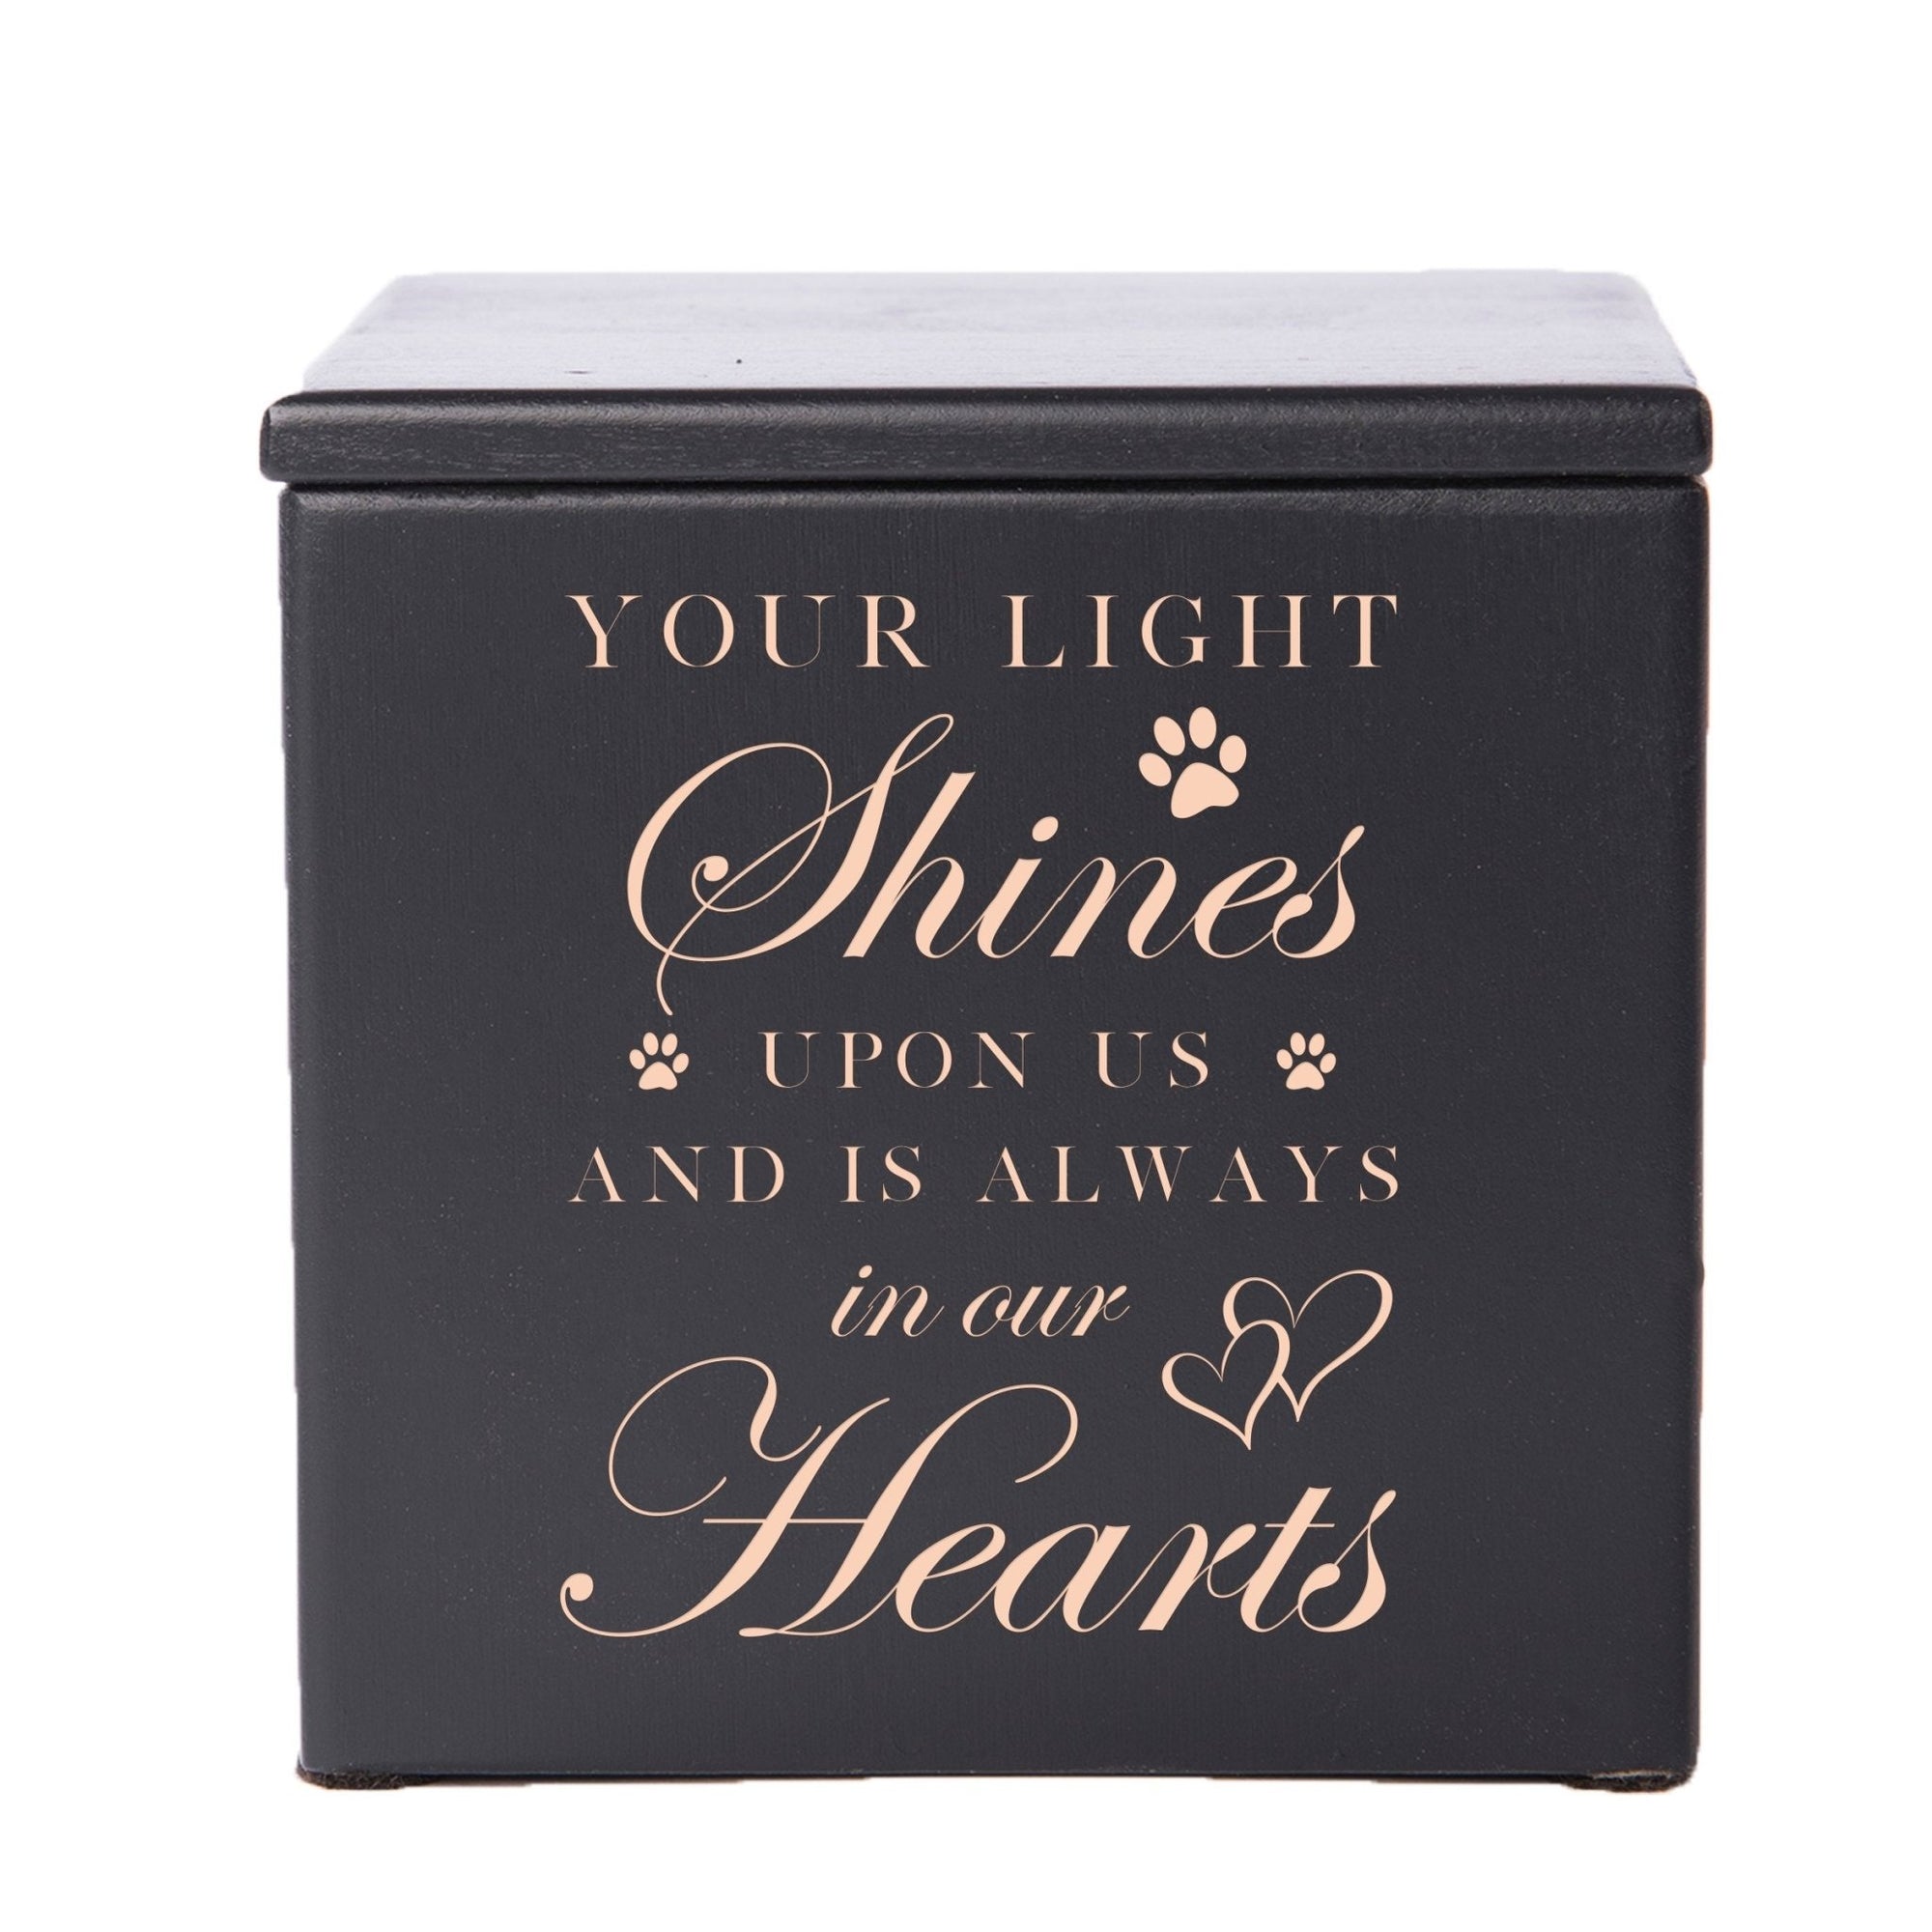 Pet Memorial Keepsake Cremation Urn Box for Dog or Cat - Your Light Shines Upon Us - LifeSong Milestones